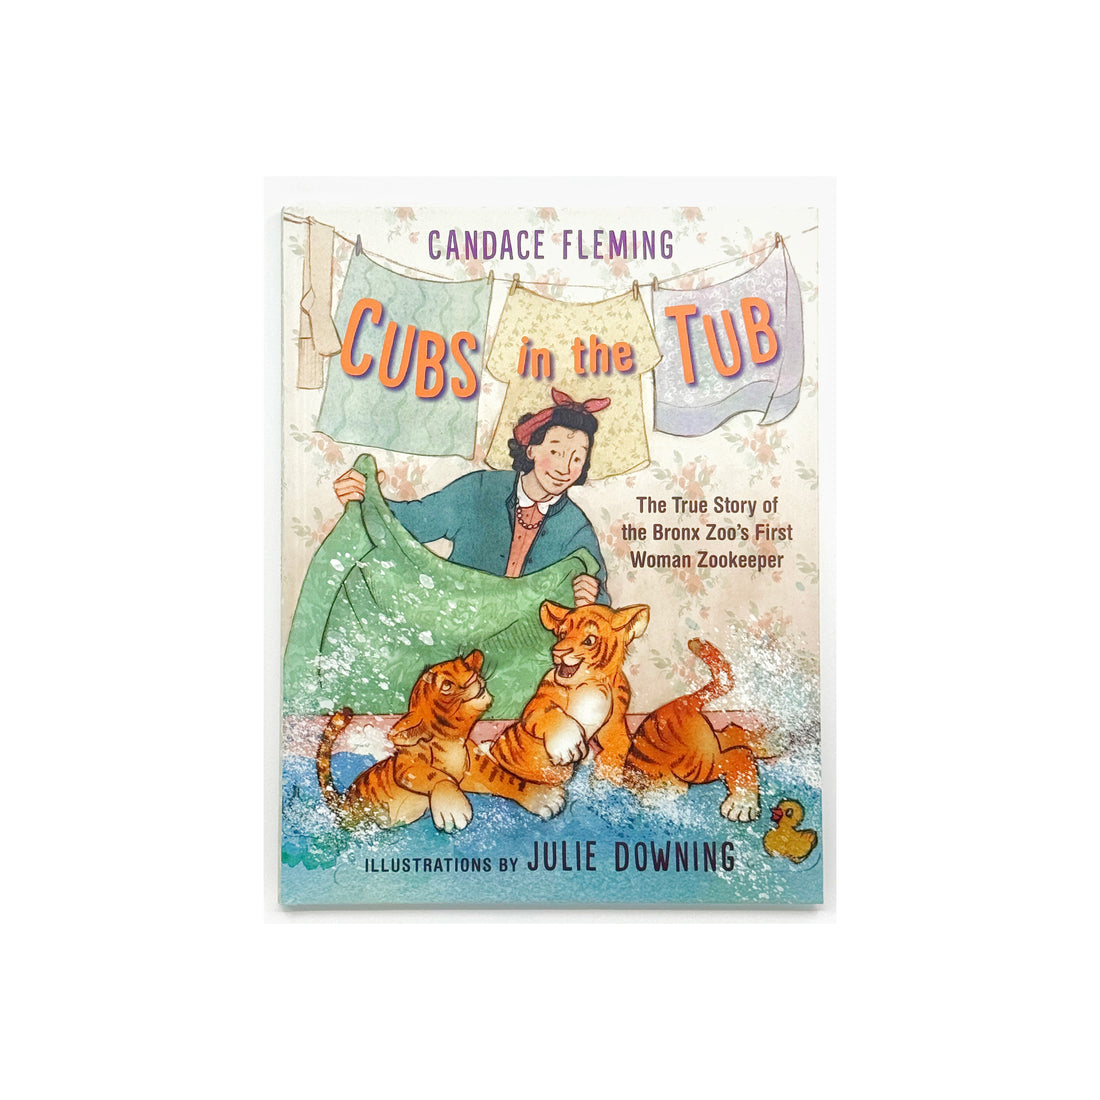 Cubs in the Tub by Candace Fleming